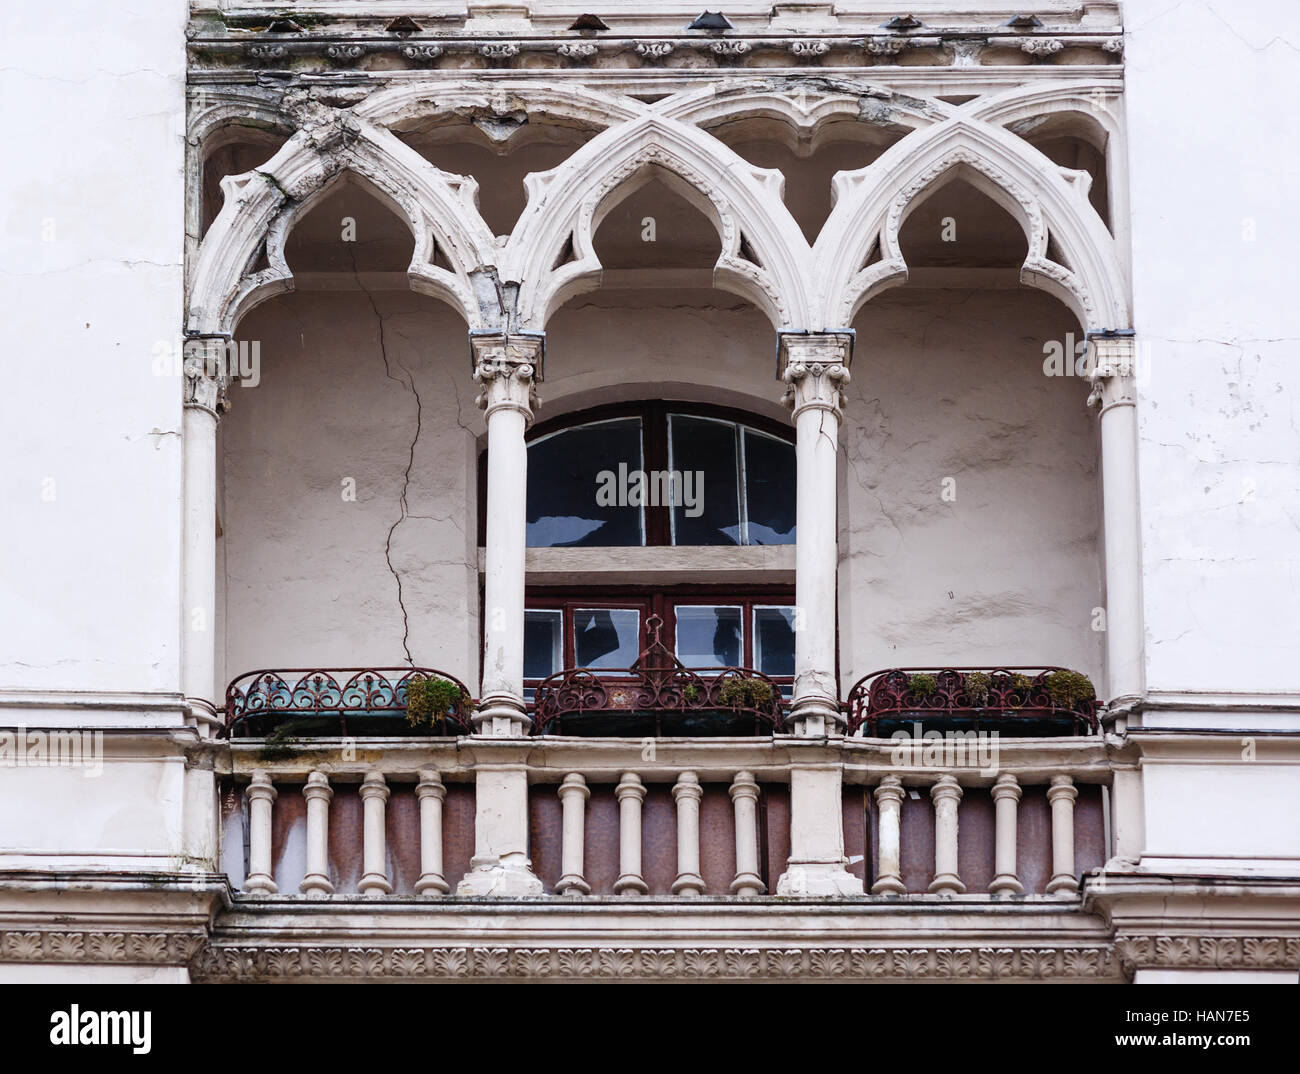 Antique balcony in the Gothic style on a building facade Stock Photo